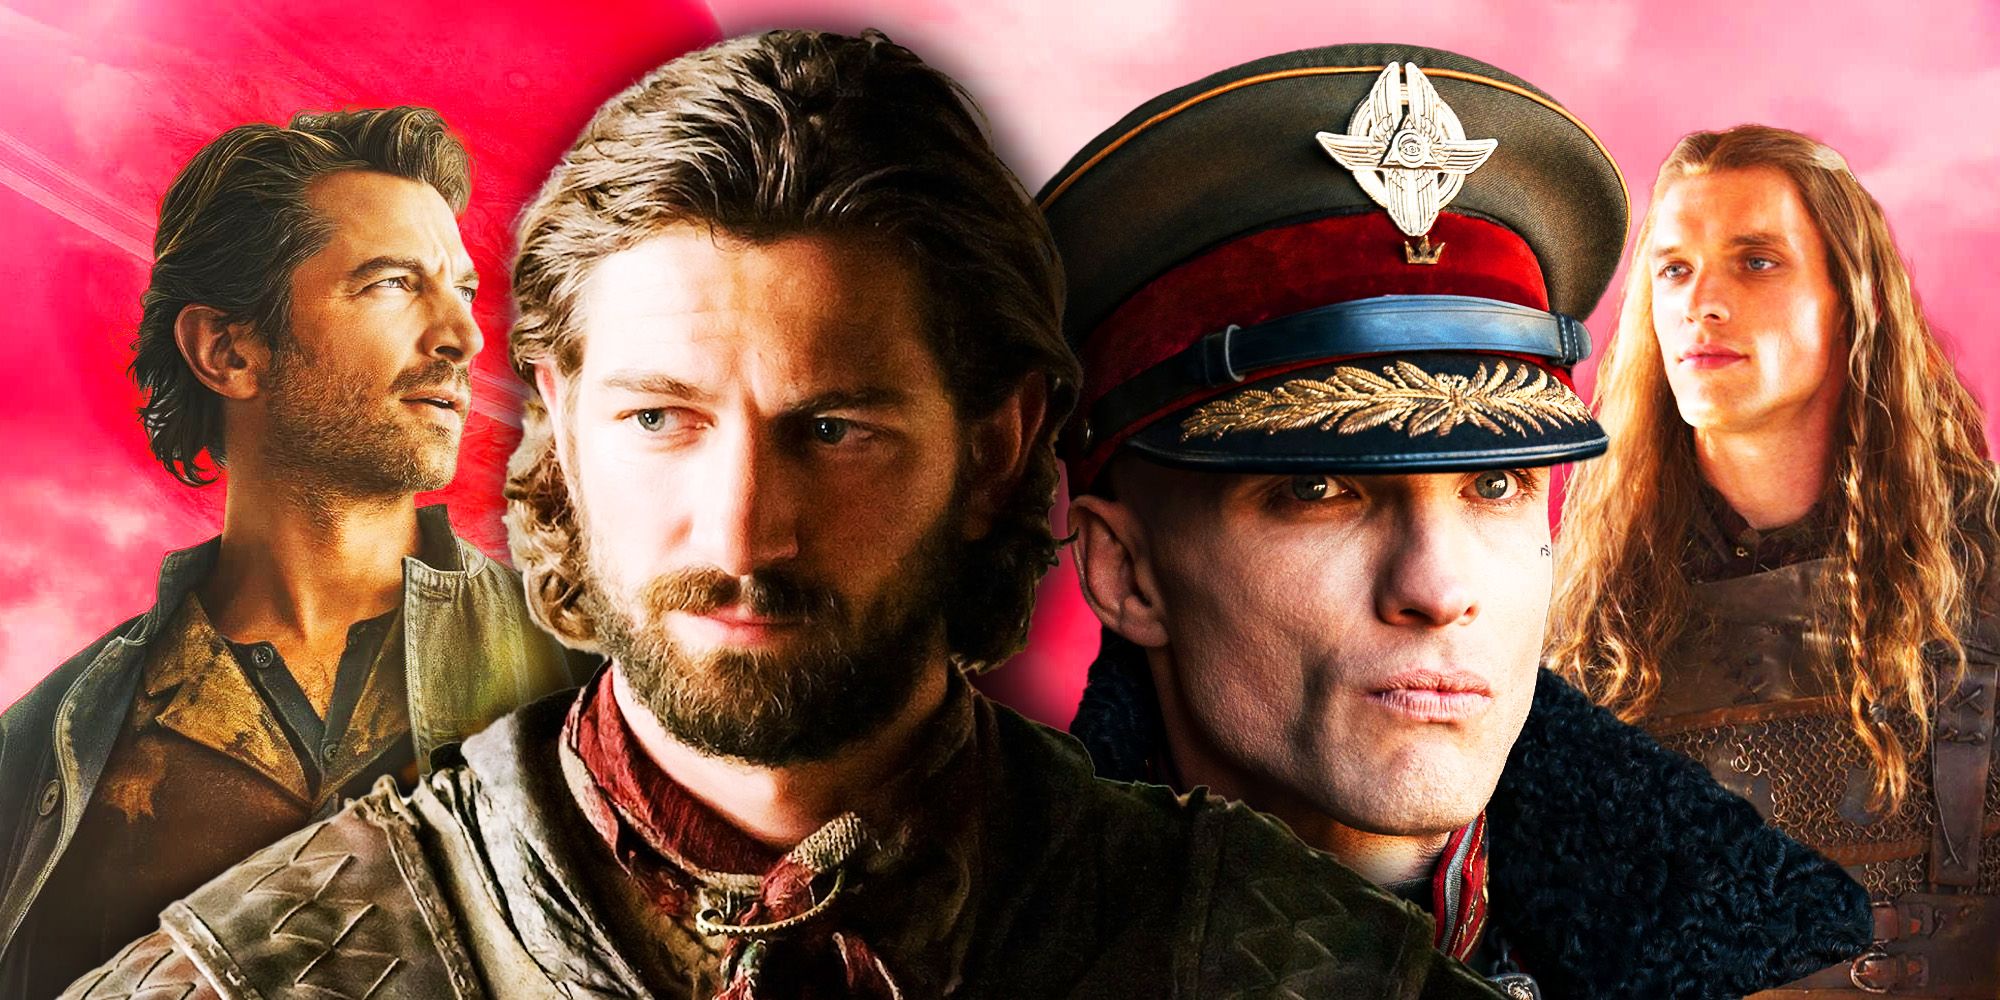 Collage of Michiel Huisman and Ed Skrein's characters in Game of Thrones & Rebel Moon